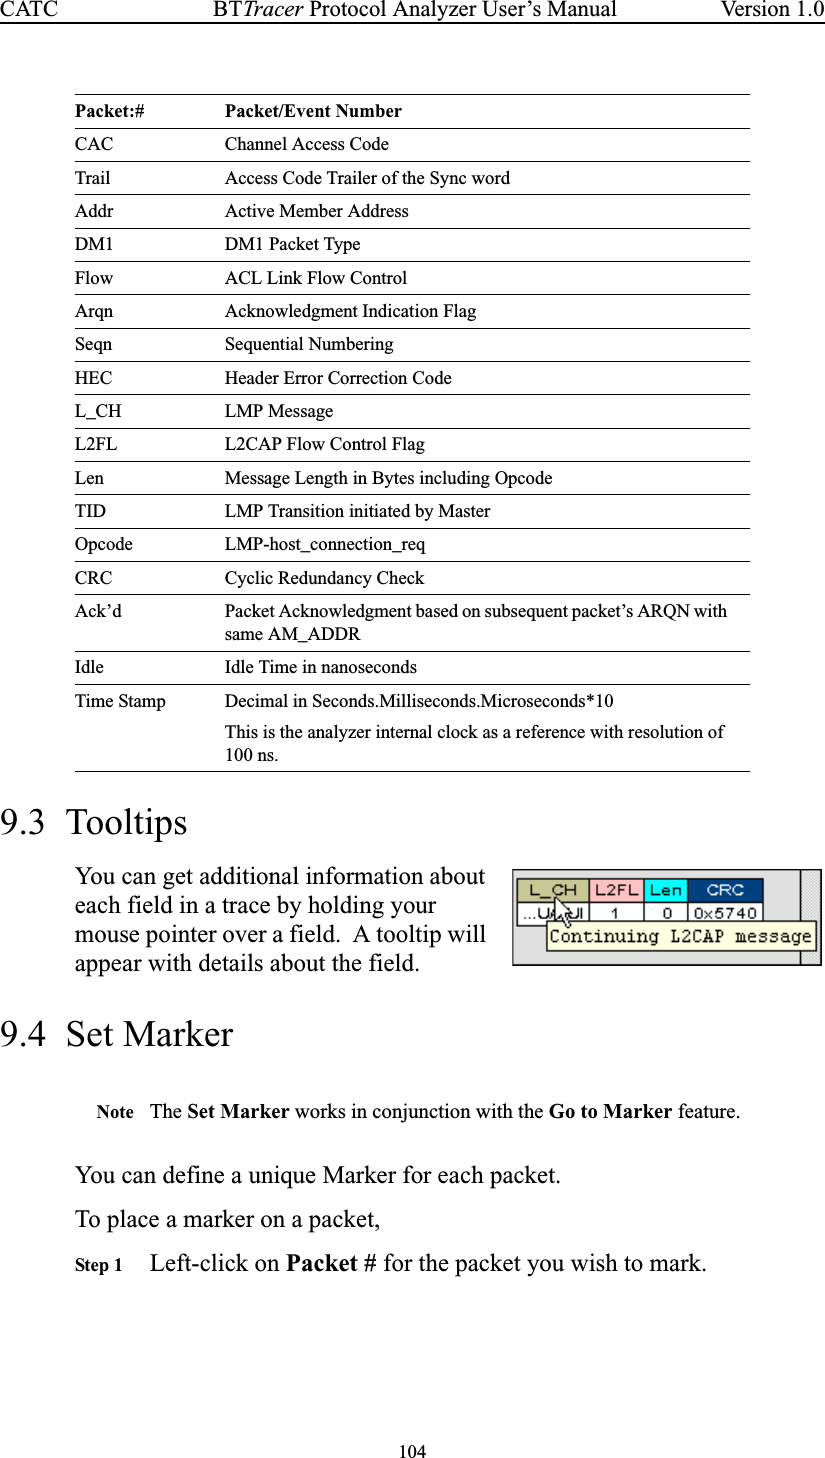 104BTTracer Protocol Analyzer User’s ManualCATC Version 1.09.3 TooltipsYou can get additional information abouteach field in a trace by holding yourmouse pointer over a field. A tooltip willappear with details about the field.9.4 Set MarkerNote The Set Marker works in conjunction with the Go to Marker feature.You can define a unique Marker for each packet.To place a marker on a packet,Step 1 Left-click on Packet # for the packet you wish to mark.CAC Channel Access CodeTrail Access Code Trailer of the Sync wordAddr Active Member AddressDM1 DM1 Packet TypeFlow ACL Link Flow ControlArqn Acknowledgment Indication FlagSeqn Sequential NumberingHEC Header Error Correction CodeL_CH LMP MessageL2FL L2CAP Flow Control FlagLen Message Length in Bytes including OpcodeTID LMP Transition initiated by MasterOpcode LMP-host_connection_reqCRC Cyclic Redundancy CheckAck’d Packet Acknowledgment based on subsequent packet’s ARQN withsame AM_ADDRIdle Idle Time in nanosecondsTime Stamp Decimal in Seconds.Milliseconds.Microseconds*10This is the analyzer internal clock as a reference with resolution of100 ns.Packet:# Packet/Event Number